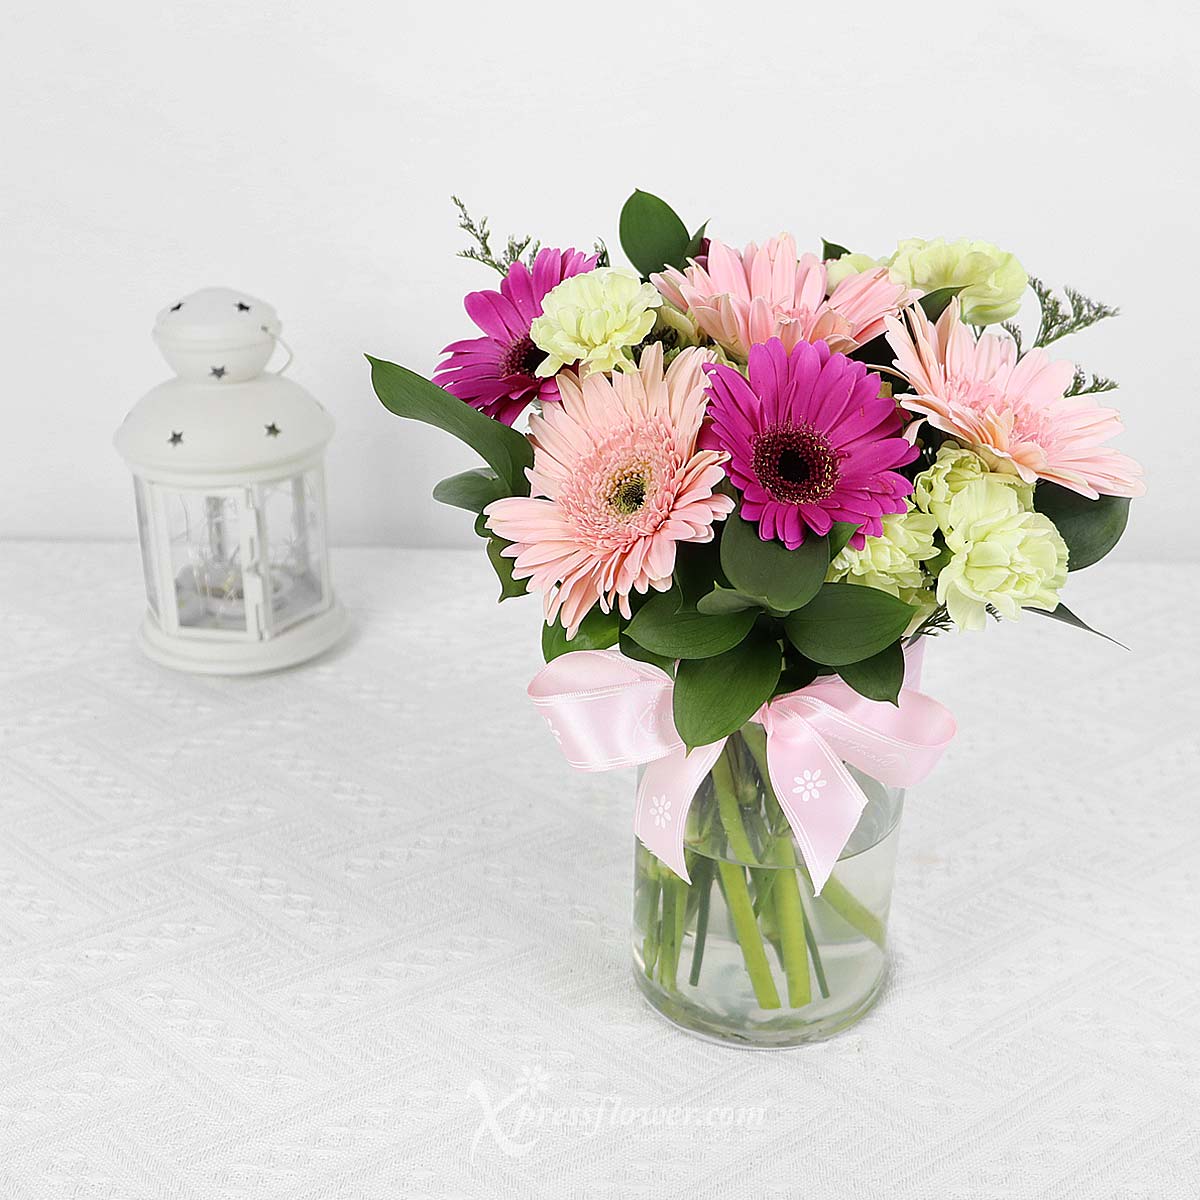 AR2307 Charismatic Classic (6 Mix Purple & Pink Gerberas with Green Carnation Spray) 1c